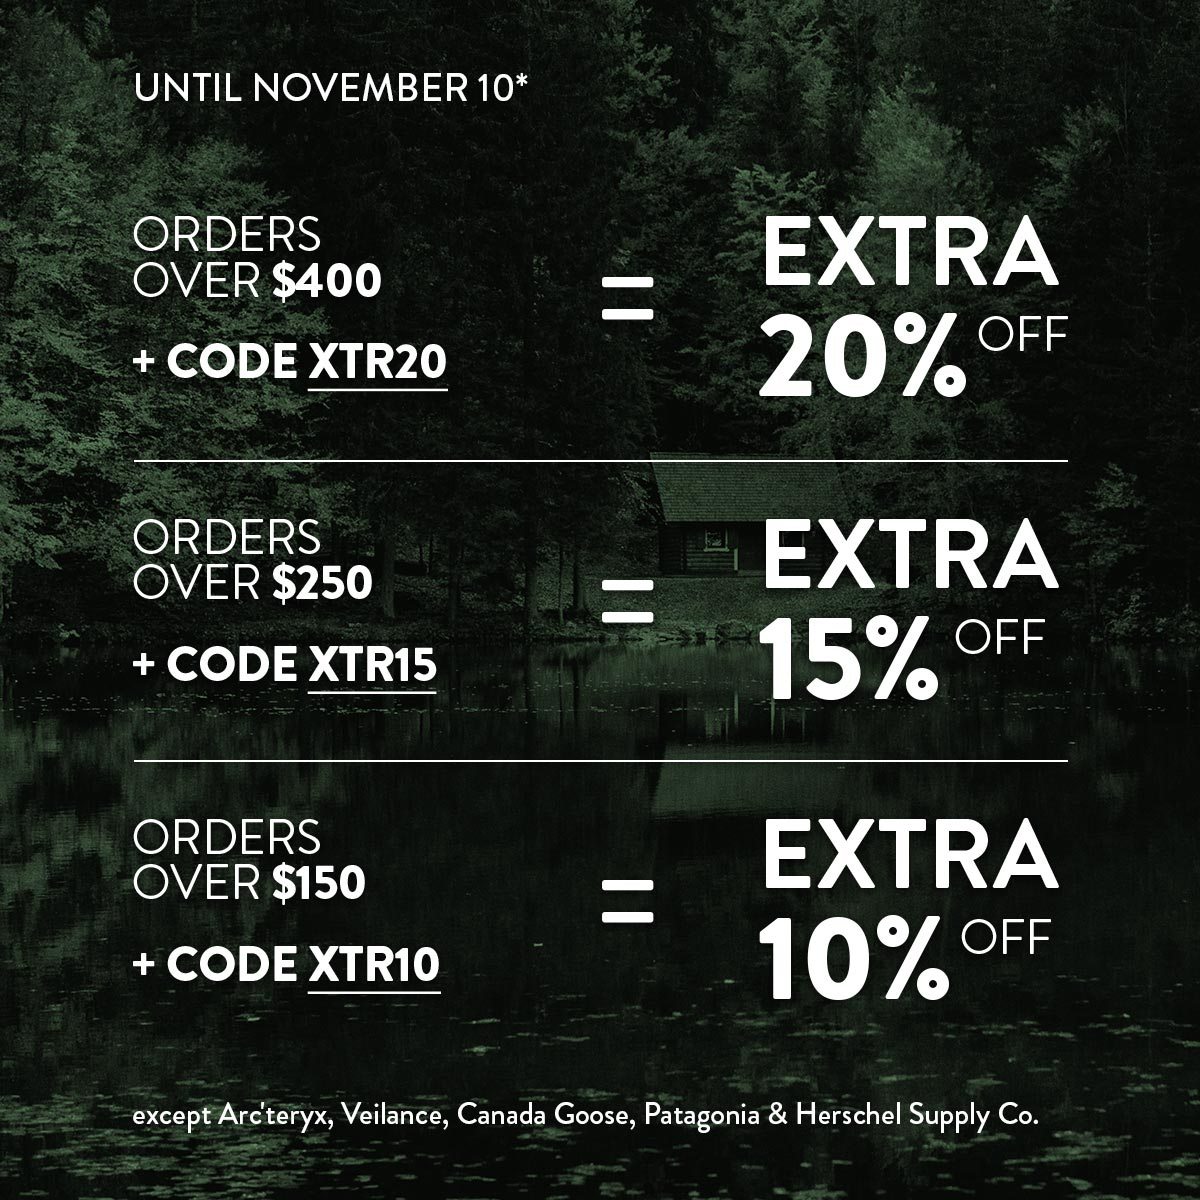 SAVE up to an extra 20% off!